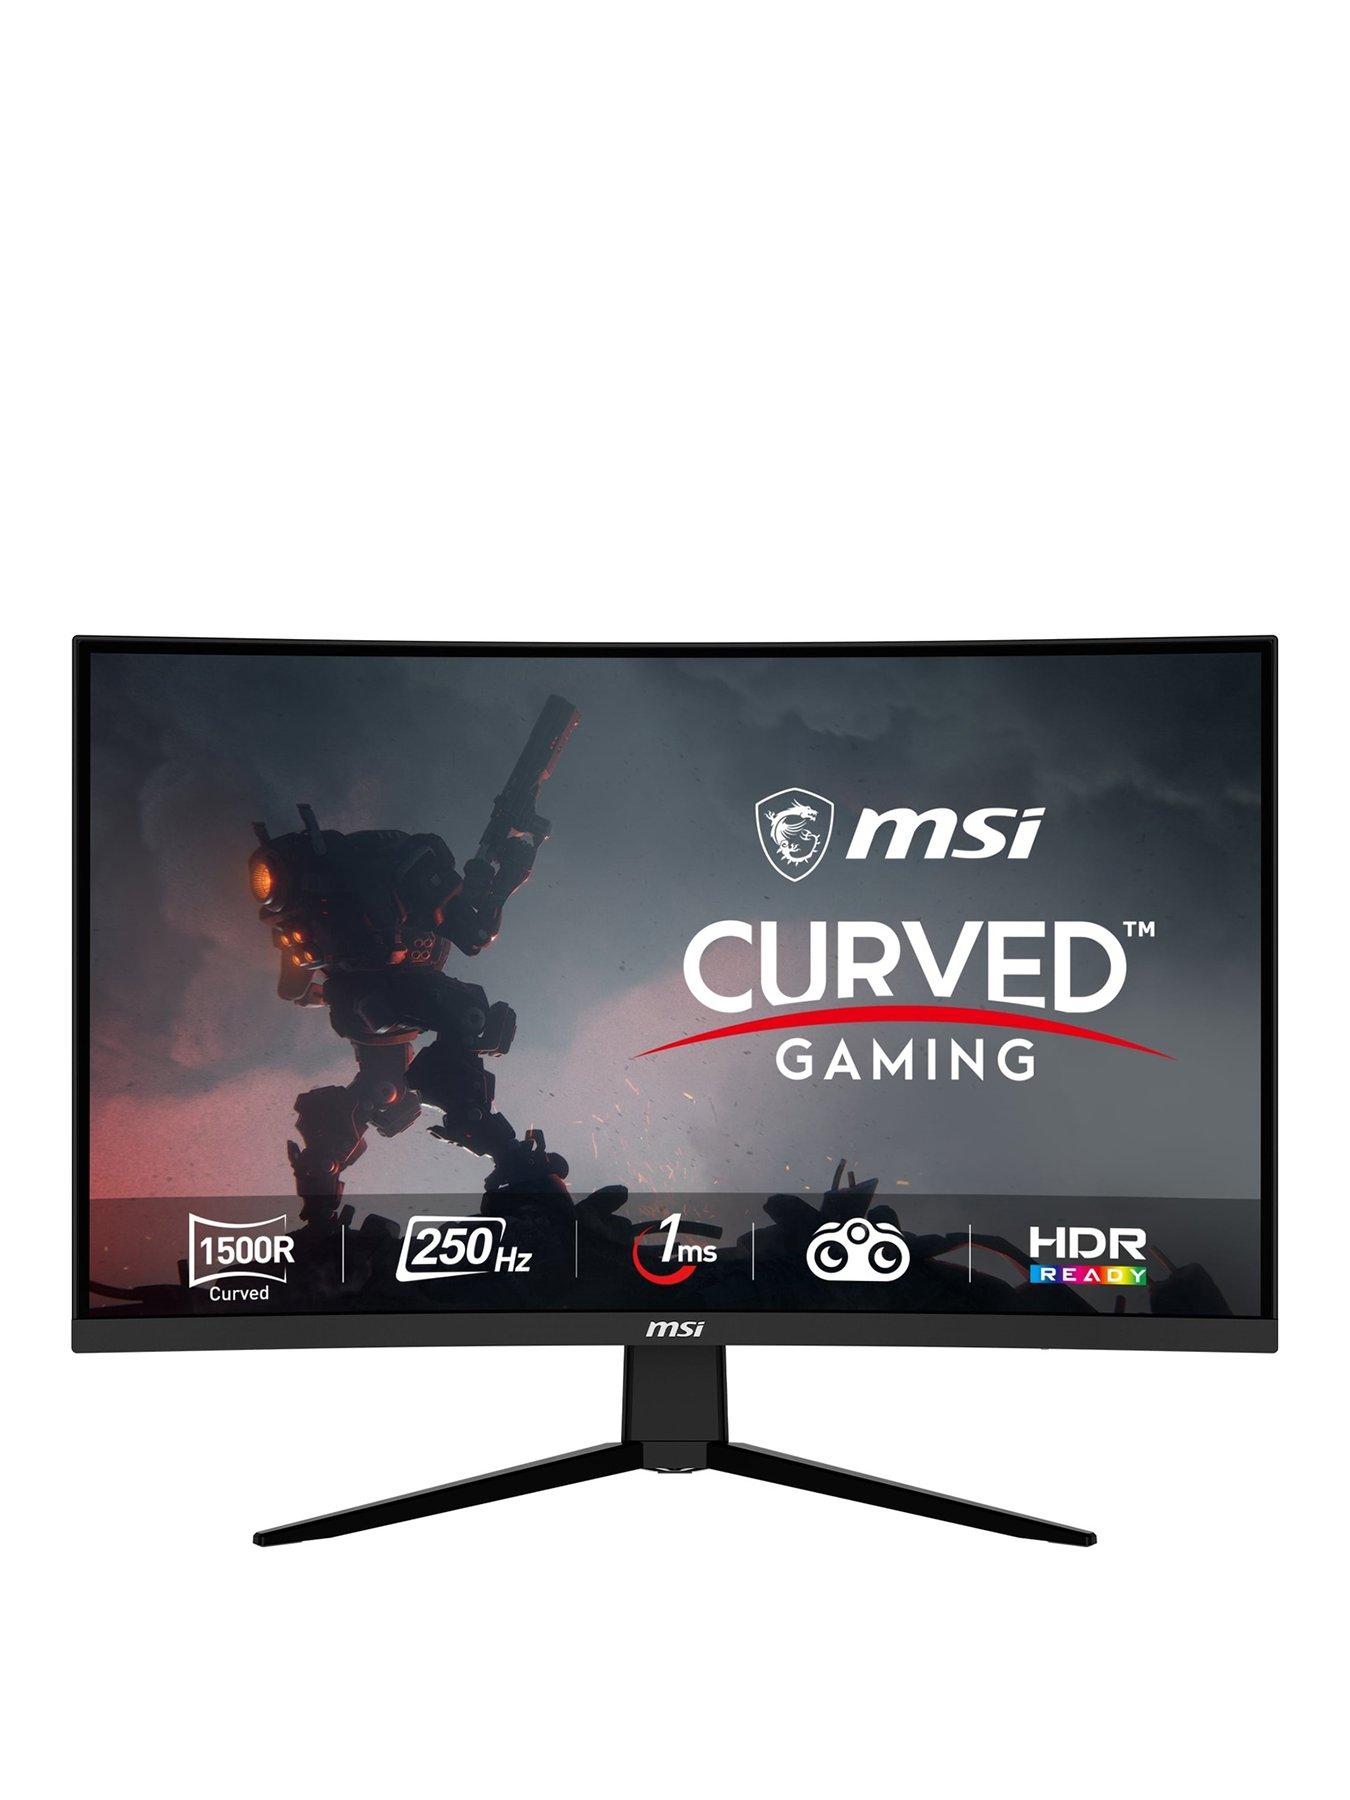 Epic deal! Grab an LG Ultrawide 34-inch QHD curved monitor for $300 off